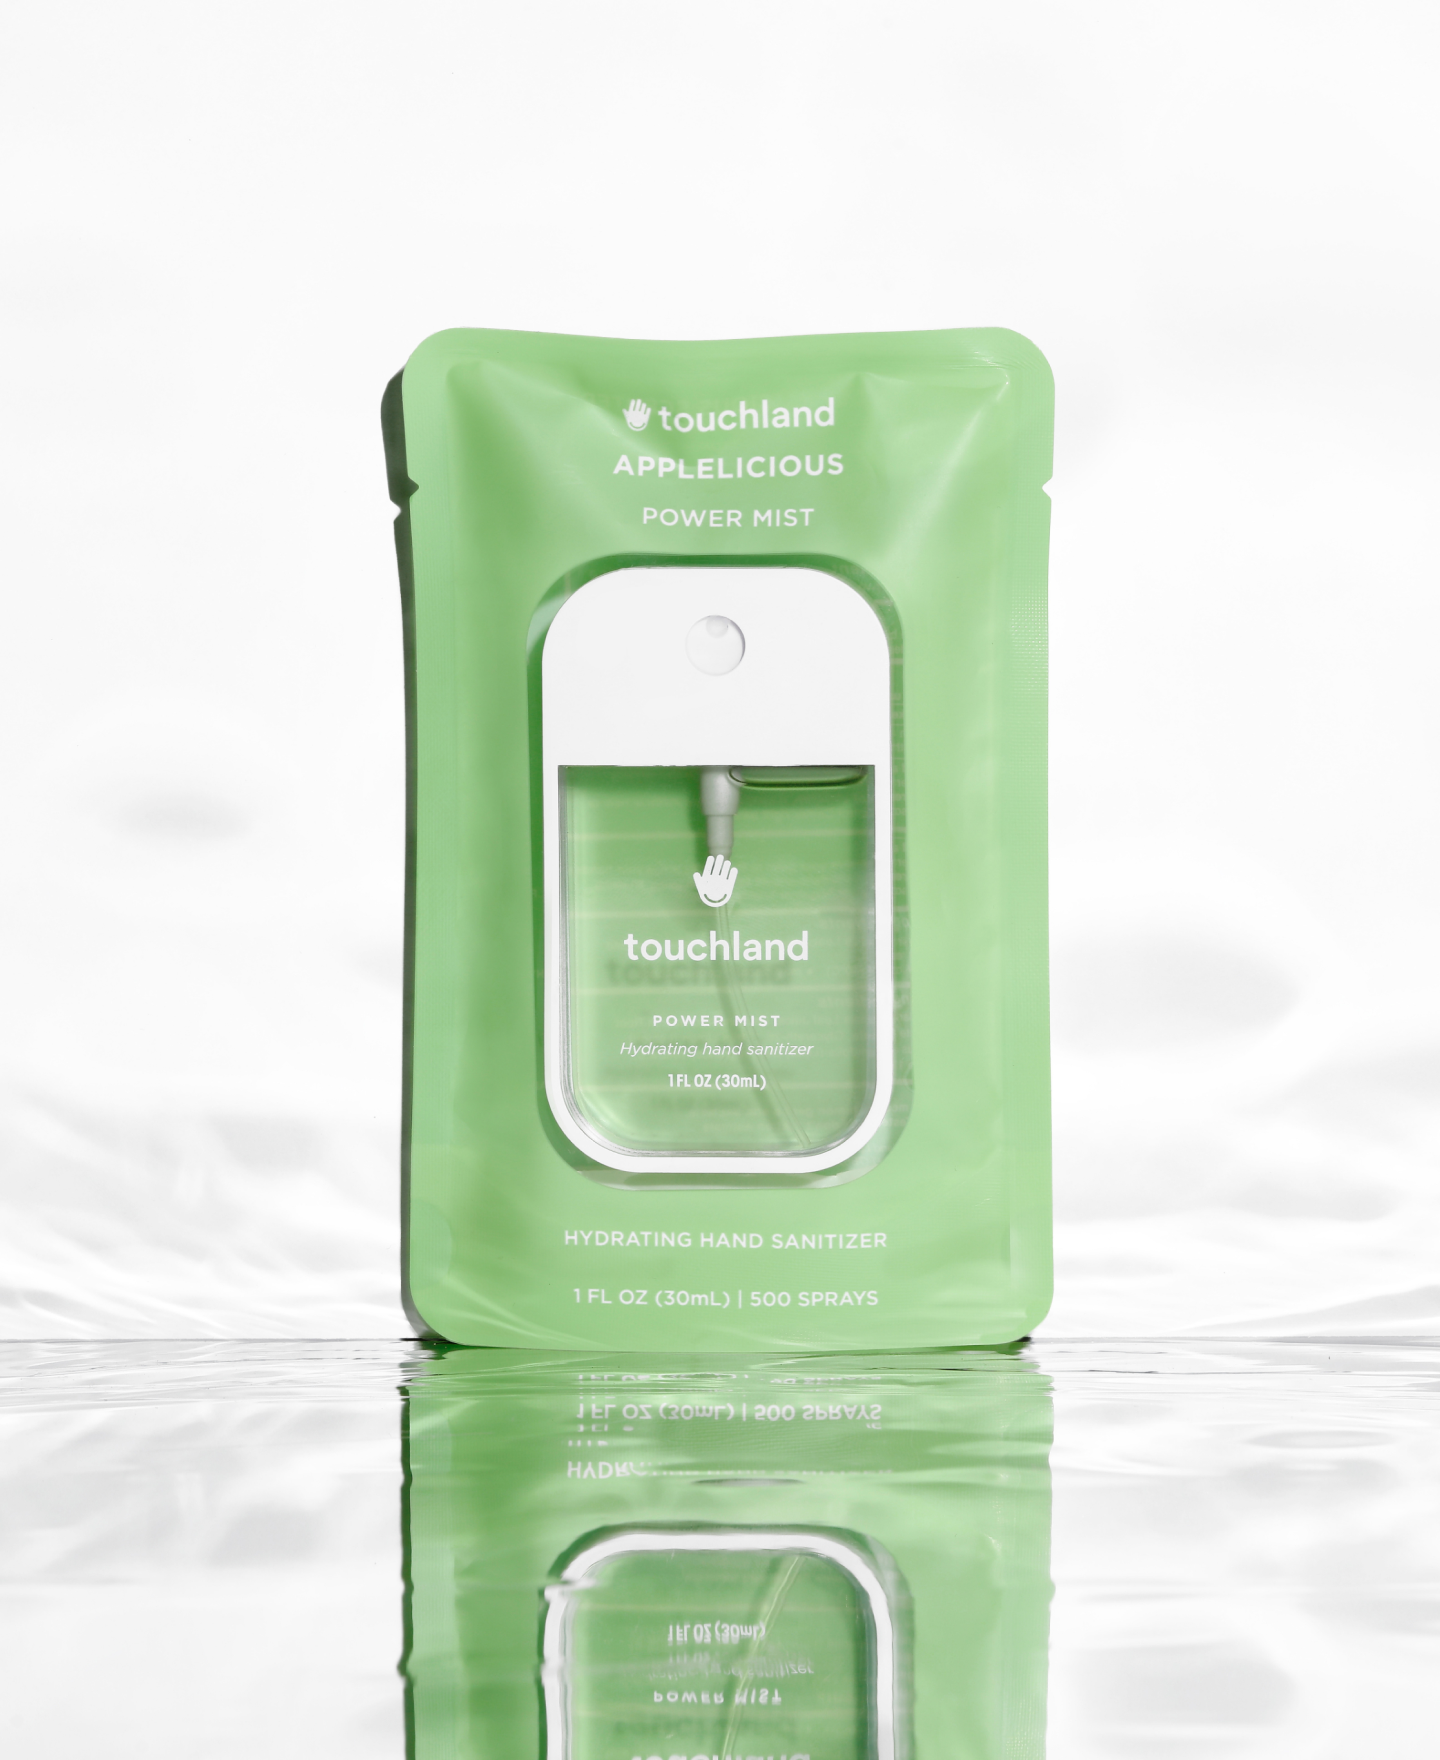 Power Mist hydrating hand sanitizer Applelicious scented inside green packaging standing on a mirror floor with water